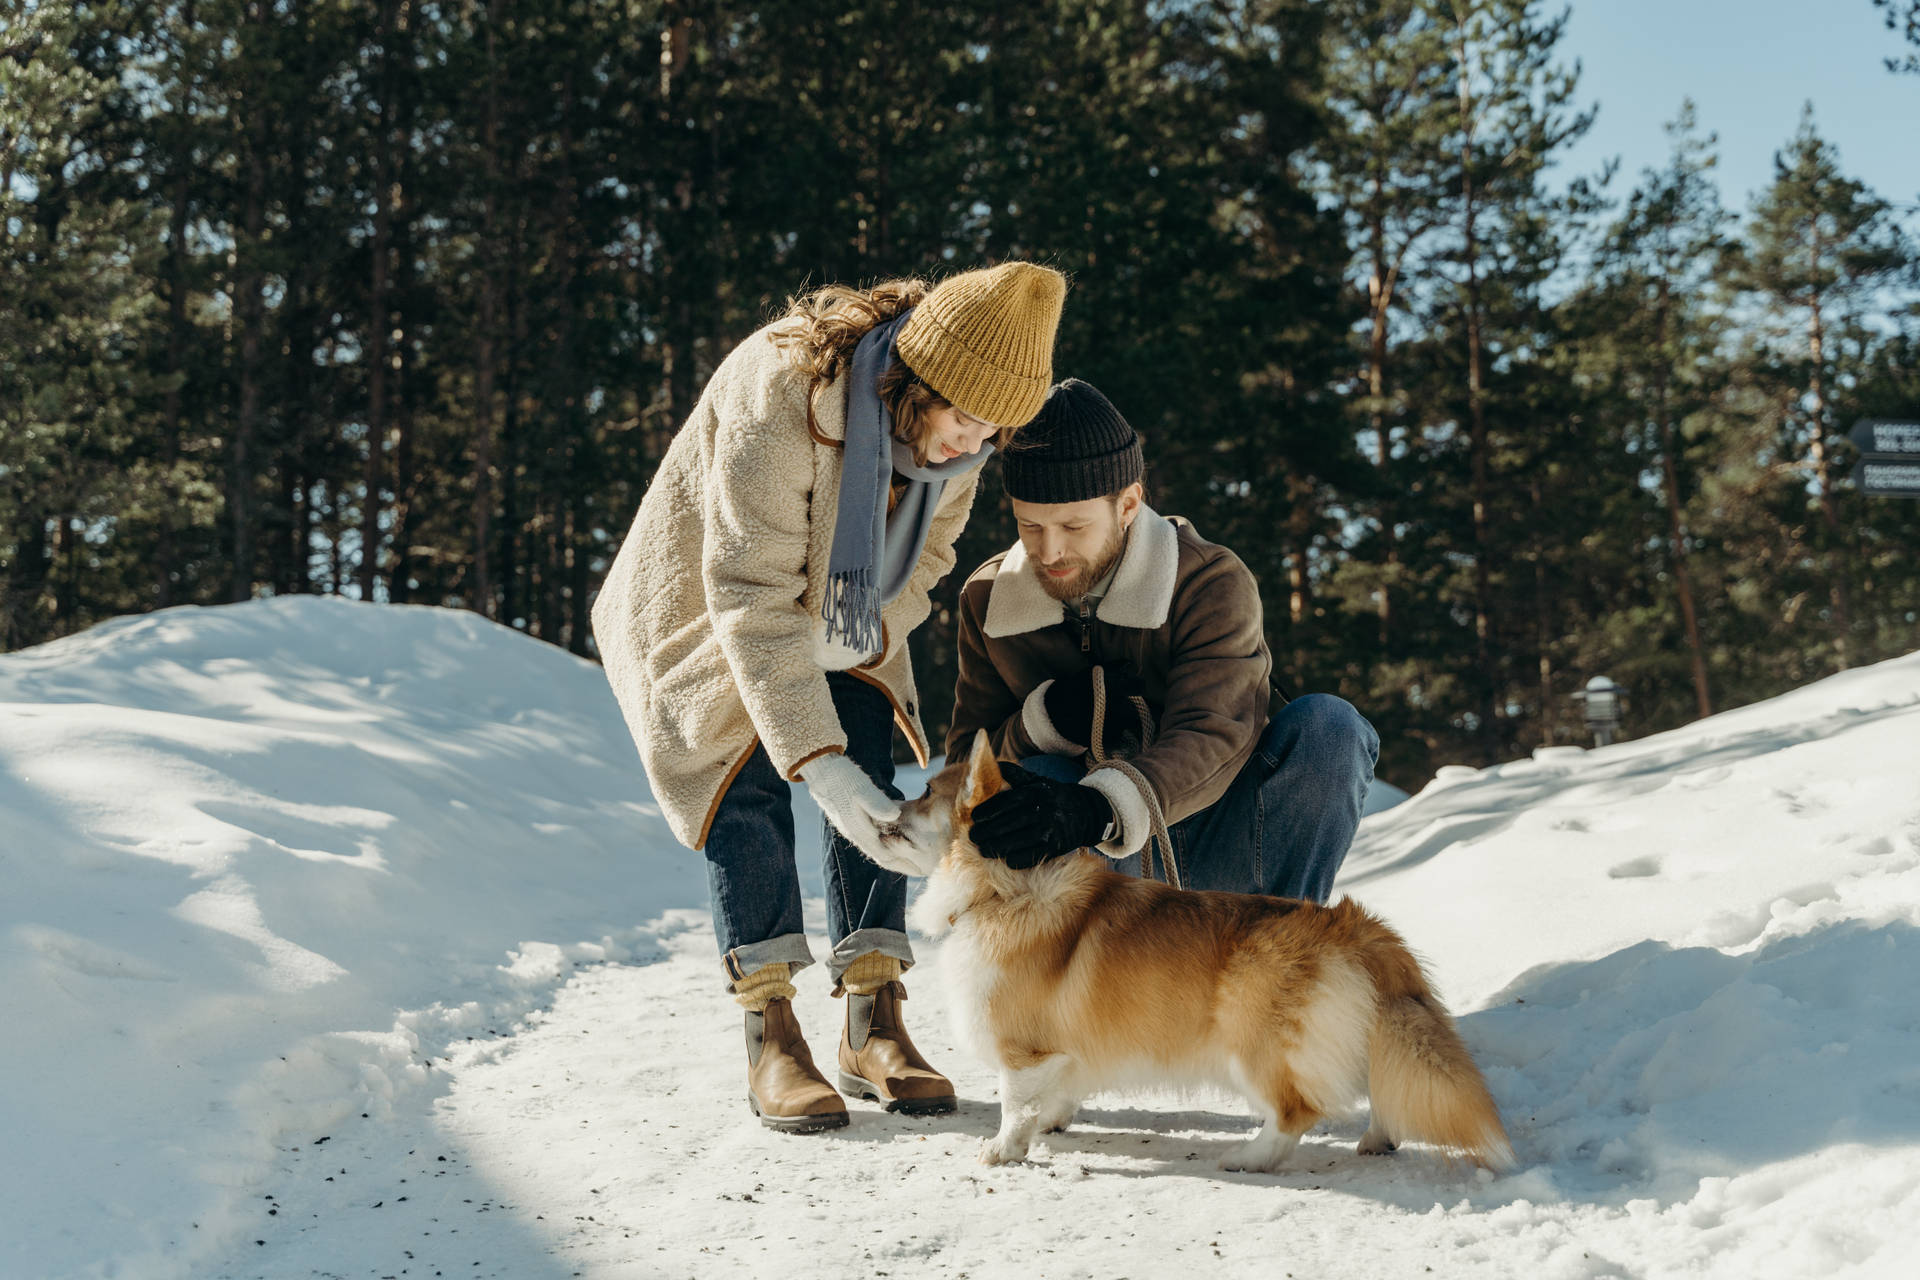 Two Cool People With Dog During Winter Wallpaper